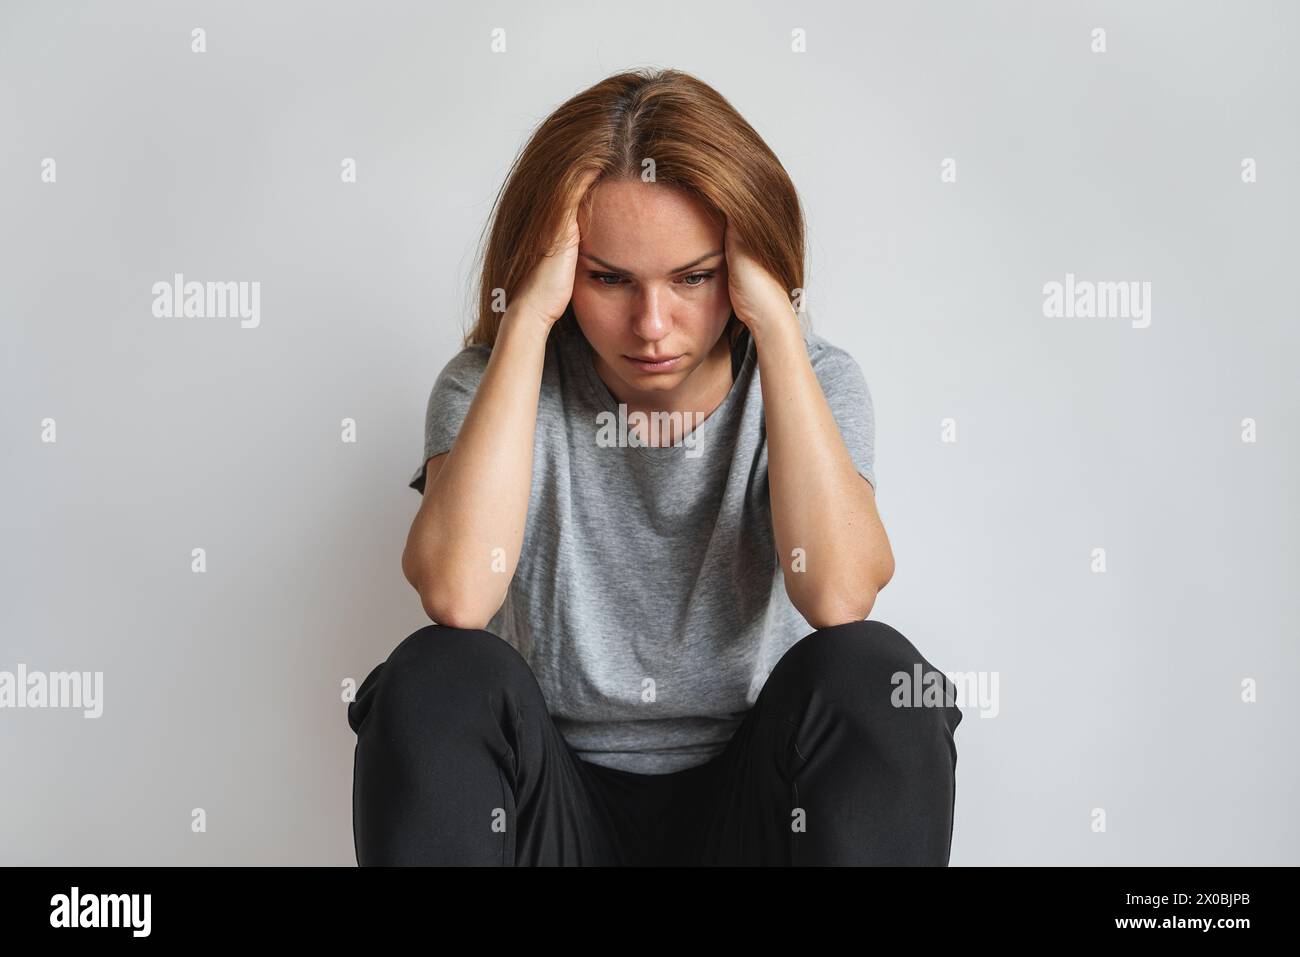 Hopeless concept. PTSD. Alone depressed woman sits next to wall and holds head with her hands. Stock Photo